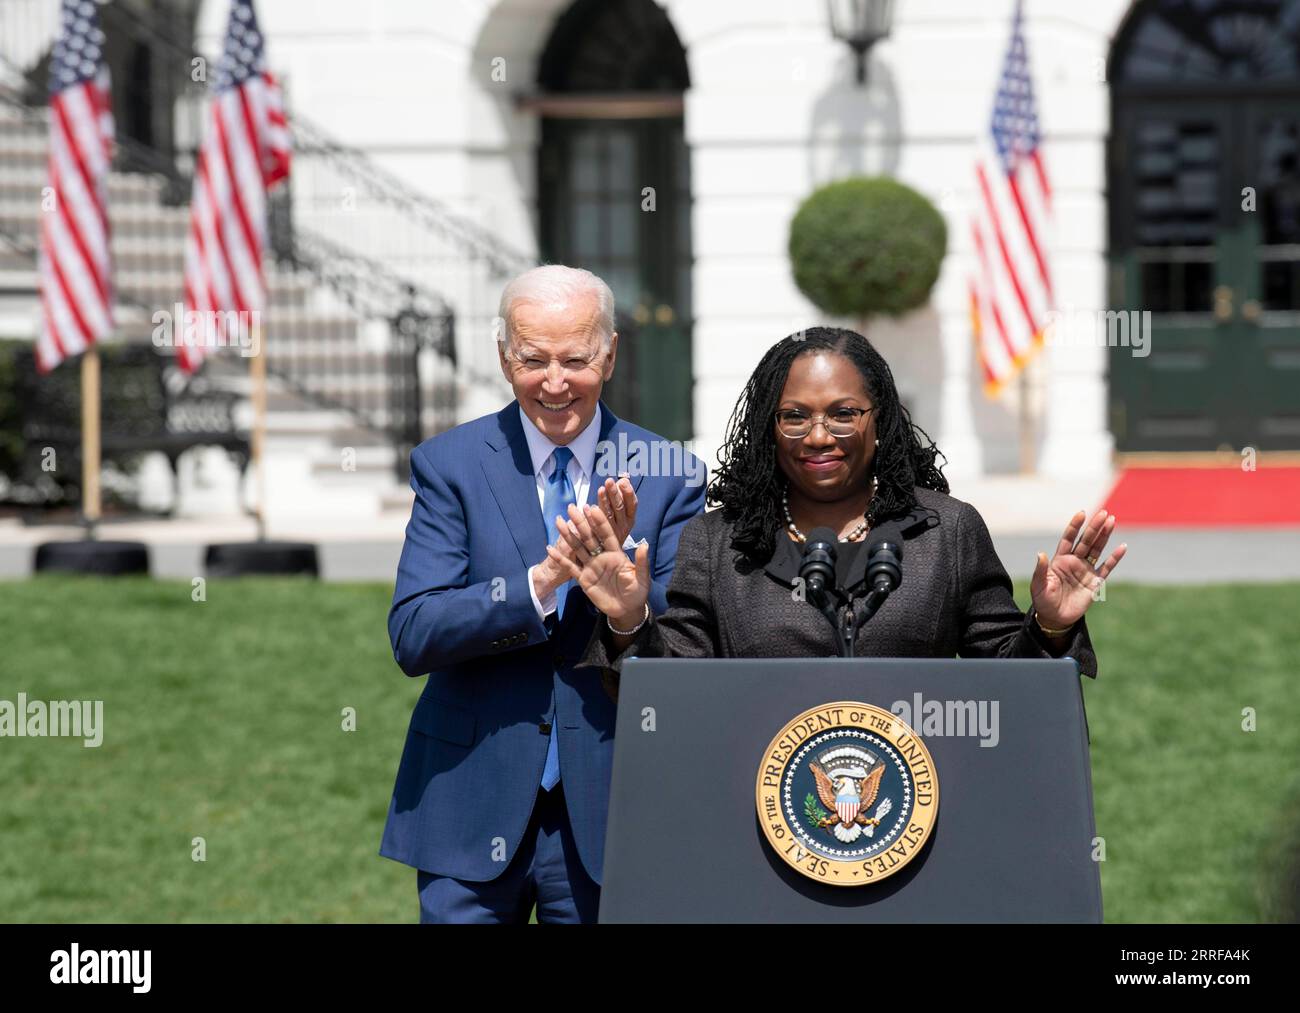 220408 -- WASHINGTON, April 8, 2022 -- Judge Ketanji Brown Jackson R and U.S. President Joe Biden attend an event marking the Senate confirmation of Jackson for the Supreme Court at the South Lawn of the White House in Washington, D.C., the United States, on April 8, 2022. The White House held the event Friday afternoon to mark the Senate confirmation of the first African American woman for the Supreme Court.  U.S.-WASHINGTON, D.C.-WHITE HOUSE-JUDGE KETANJI BROWN JACKSON-SUPREME COURT-CONFIRMATION LiuxJie PUBLICATIONxNOTxINxCHN Stock Photo